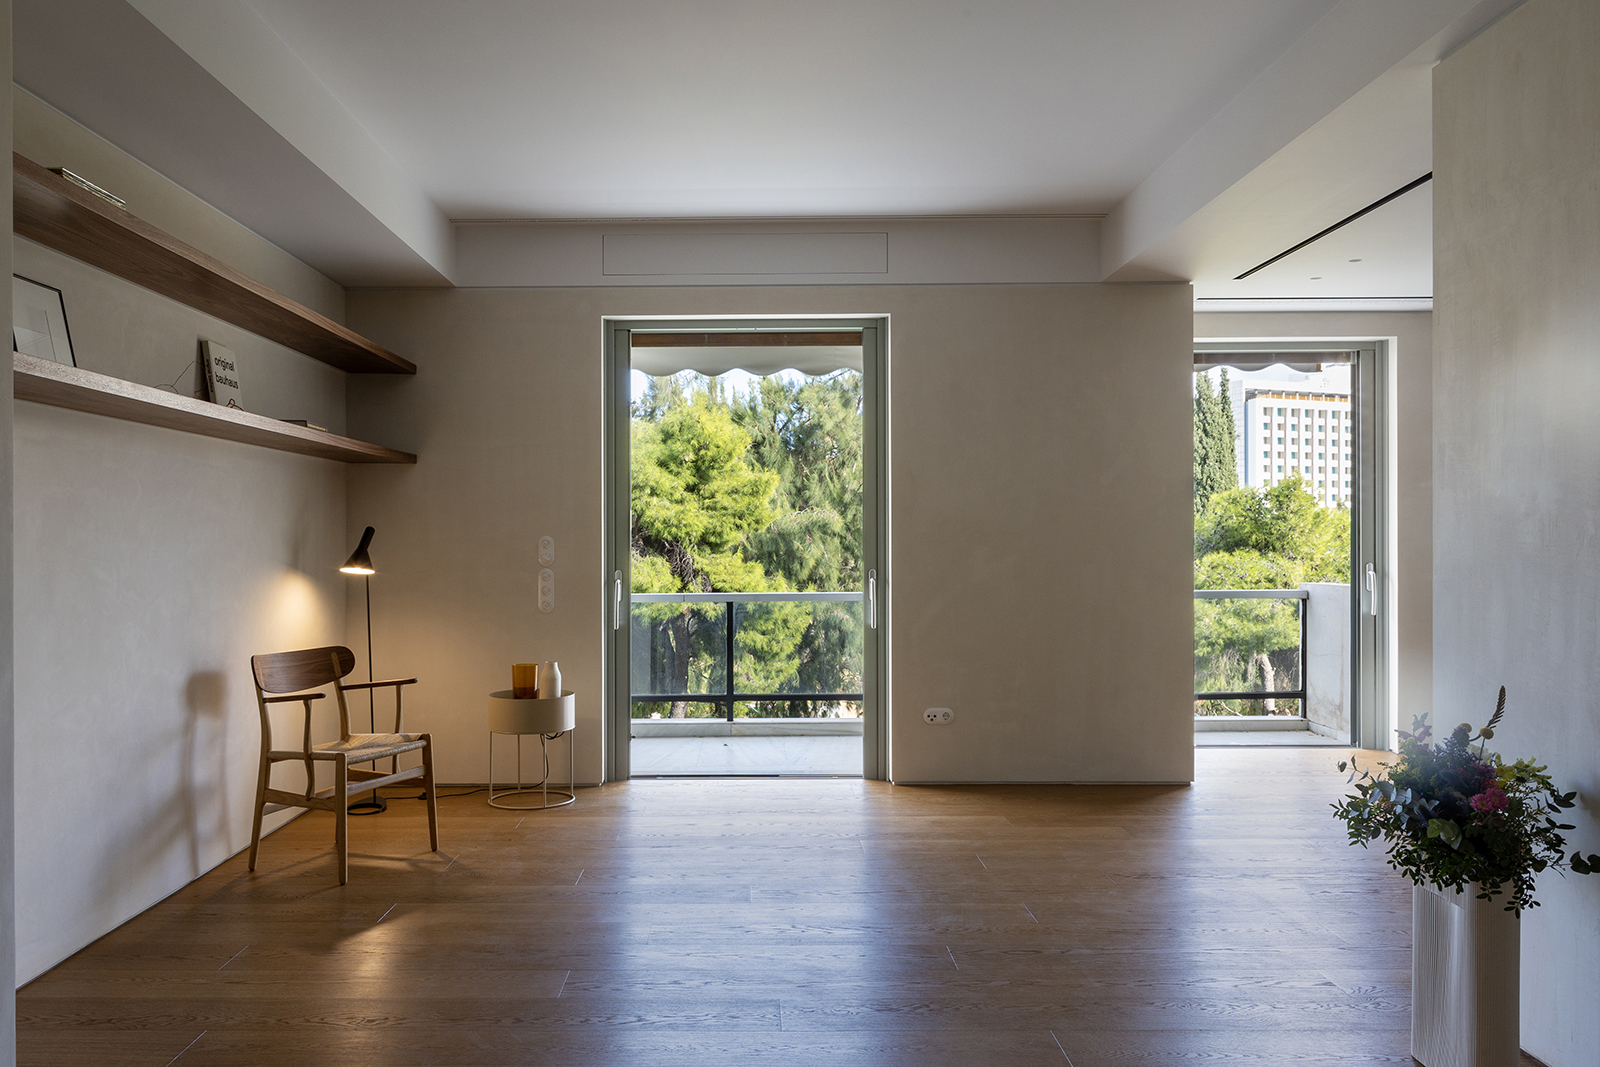 Archisearch Apartment M3 renovation in Kolonaki, Athens | 4k architects in cooperation with Studio Taf